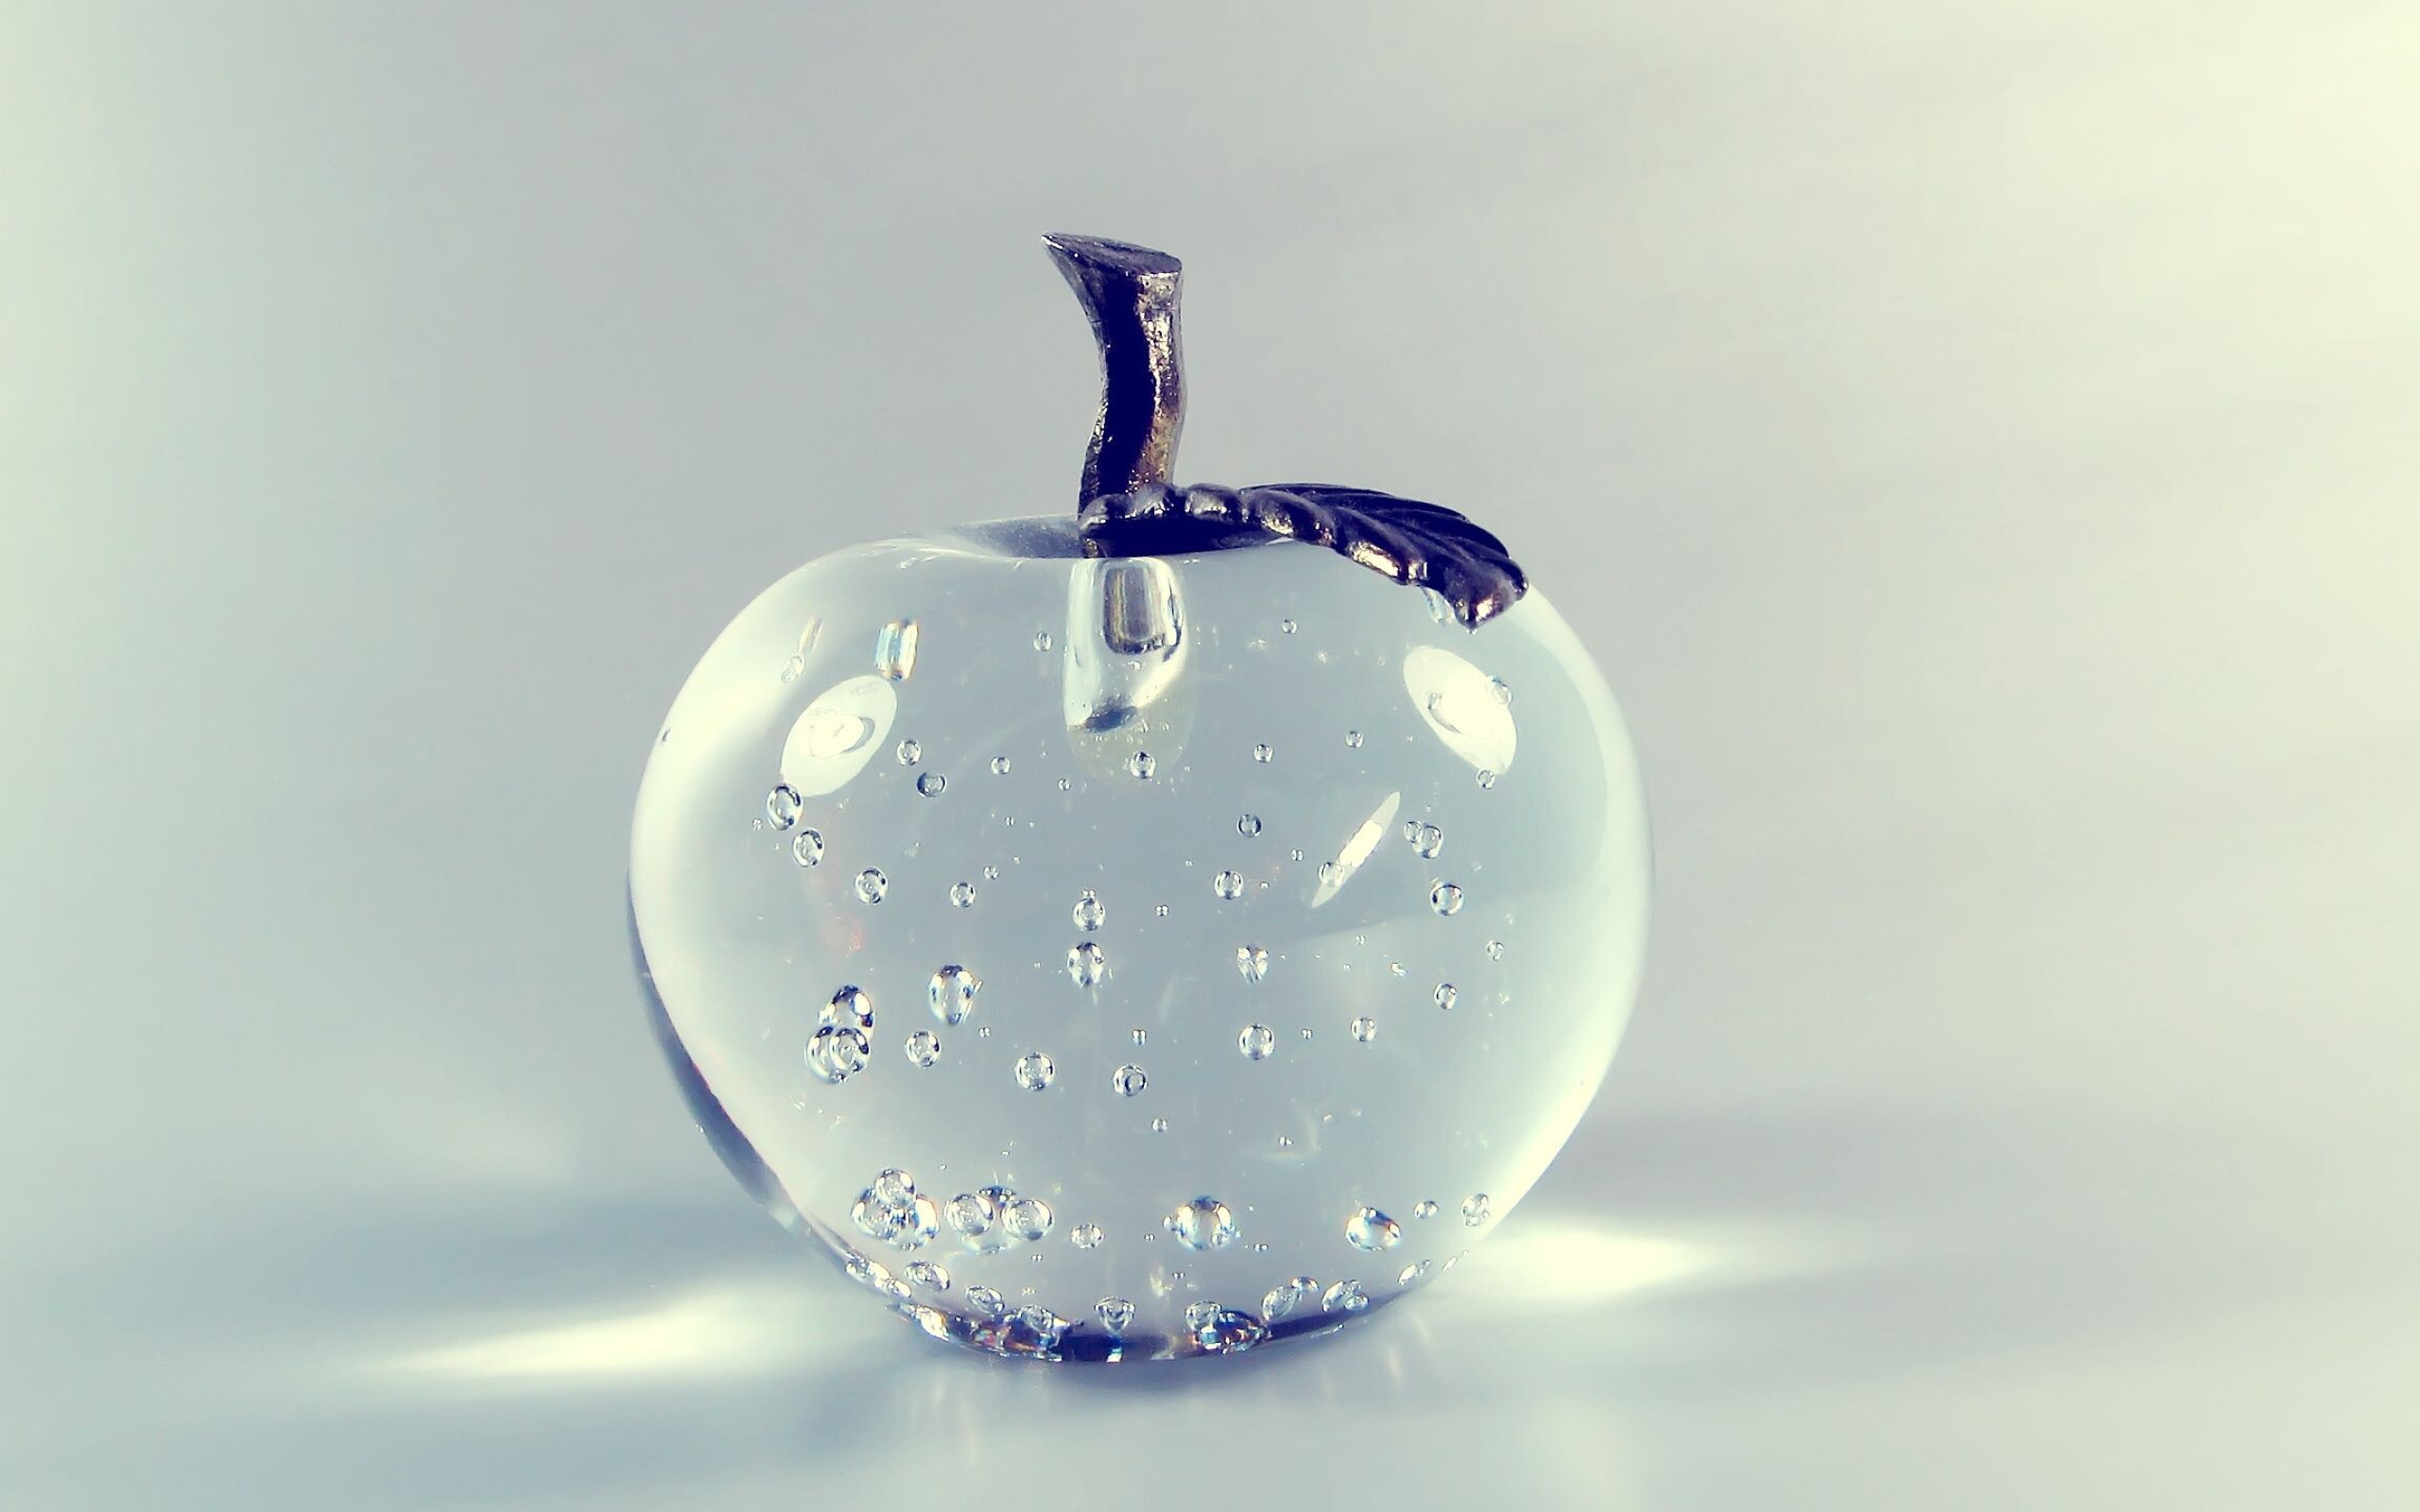 Glass: An artificial apple, An inorganic solid material that is transparent or translucent. 2560x1600 HD Background.